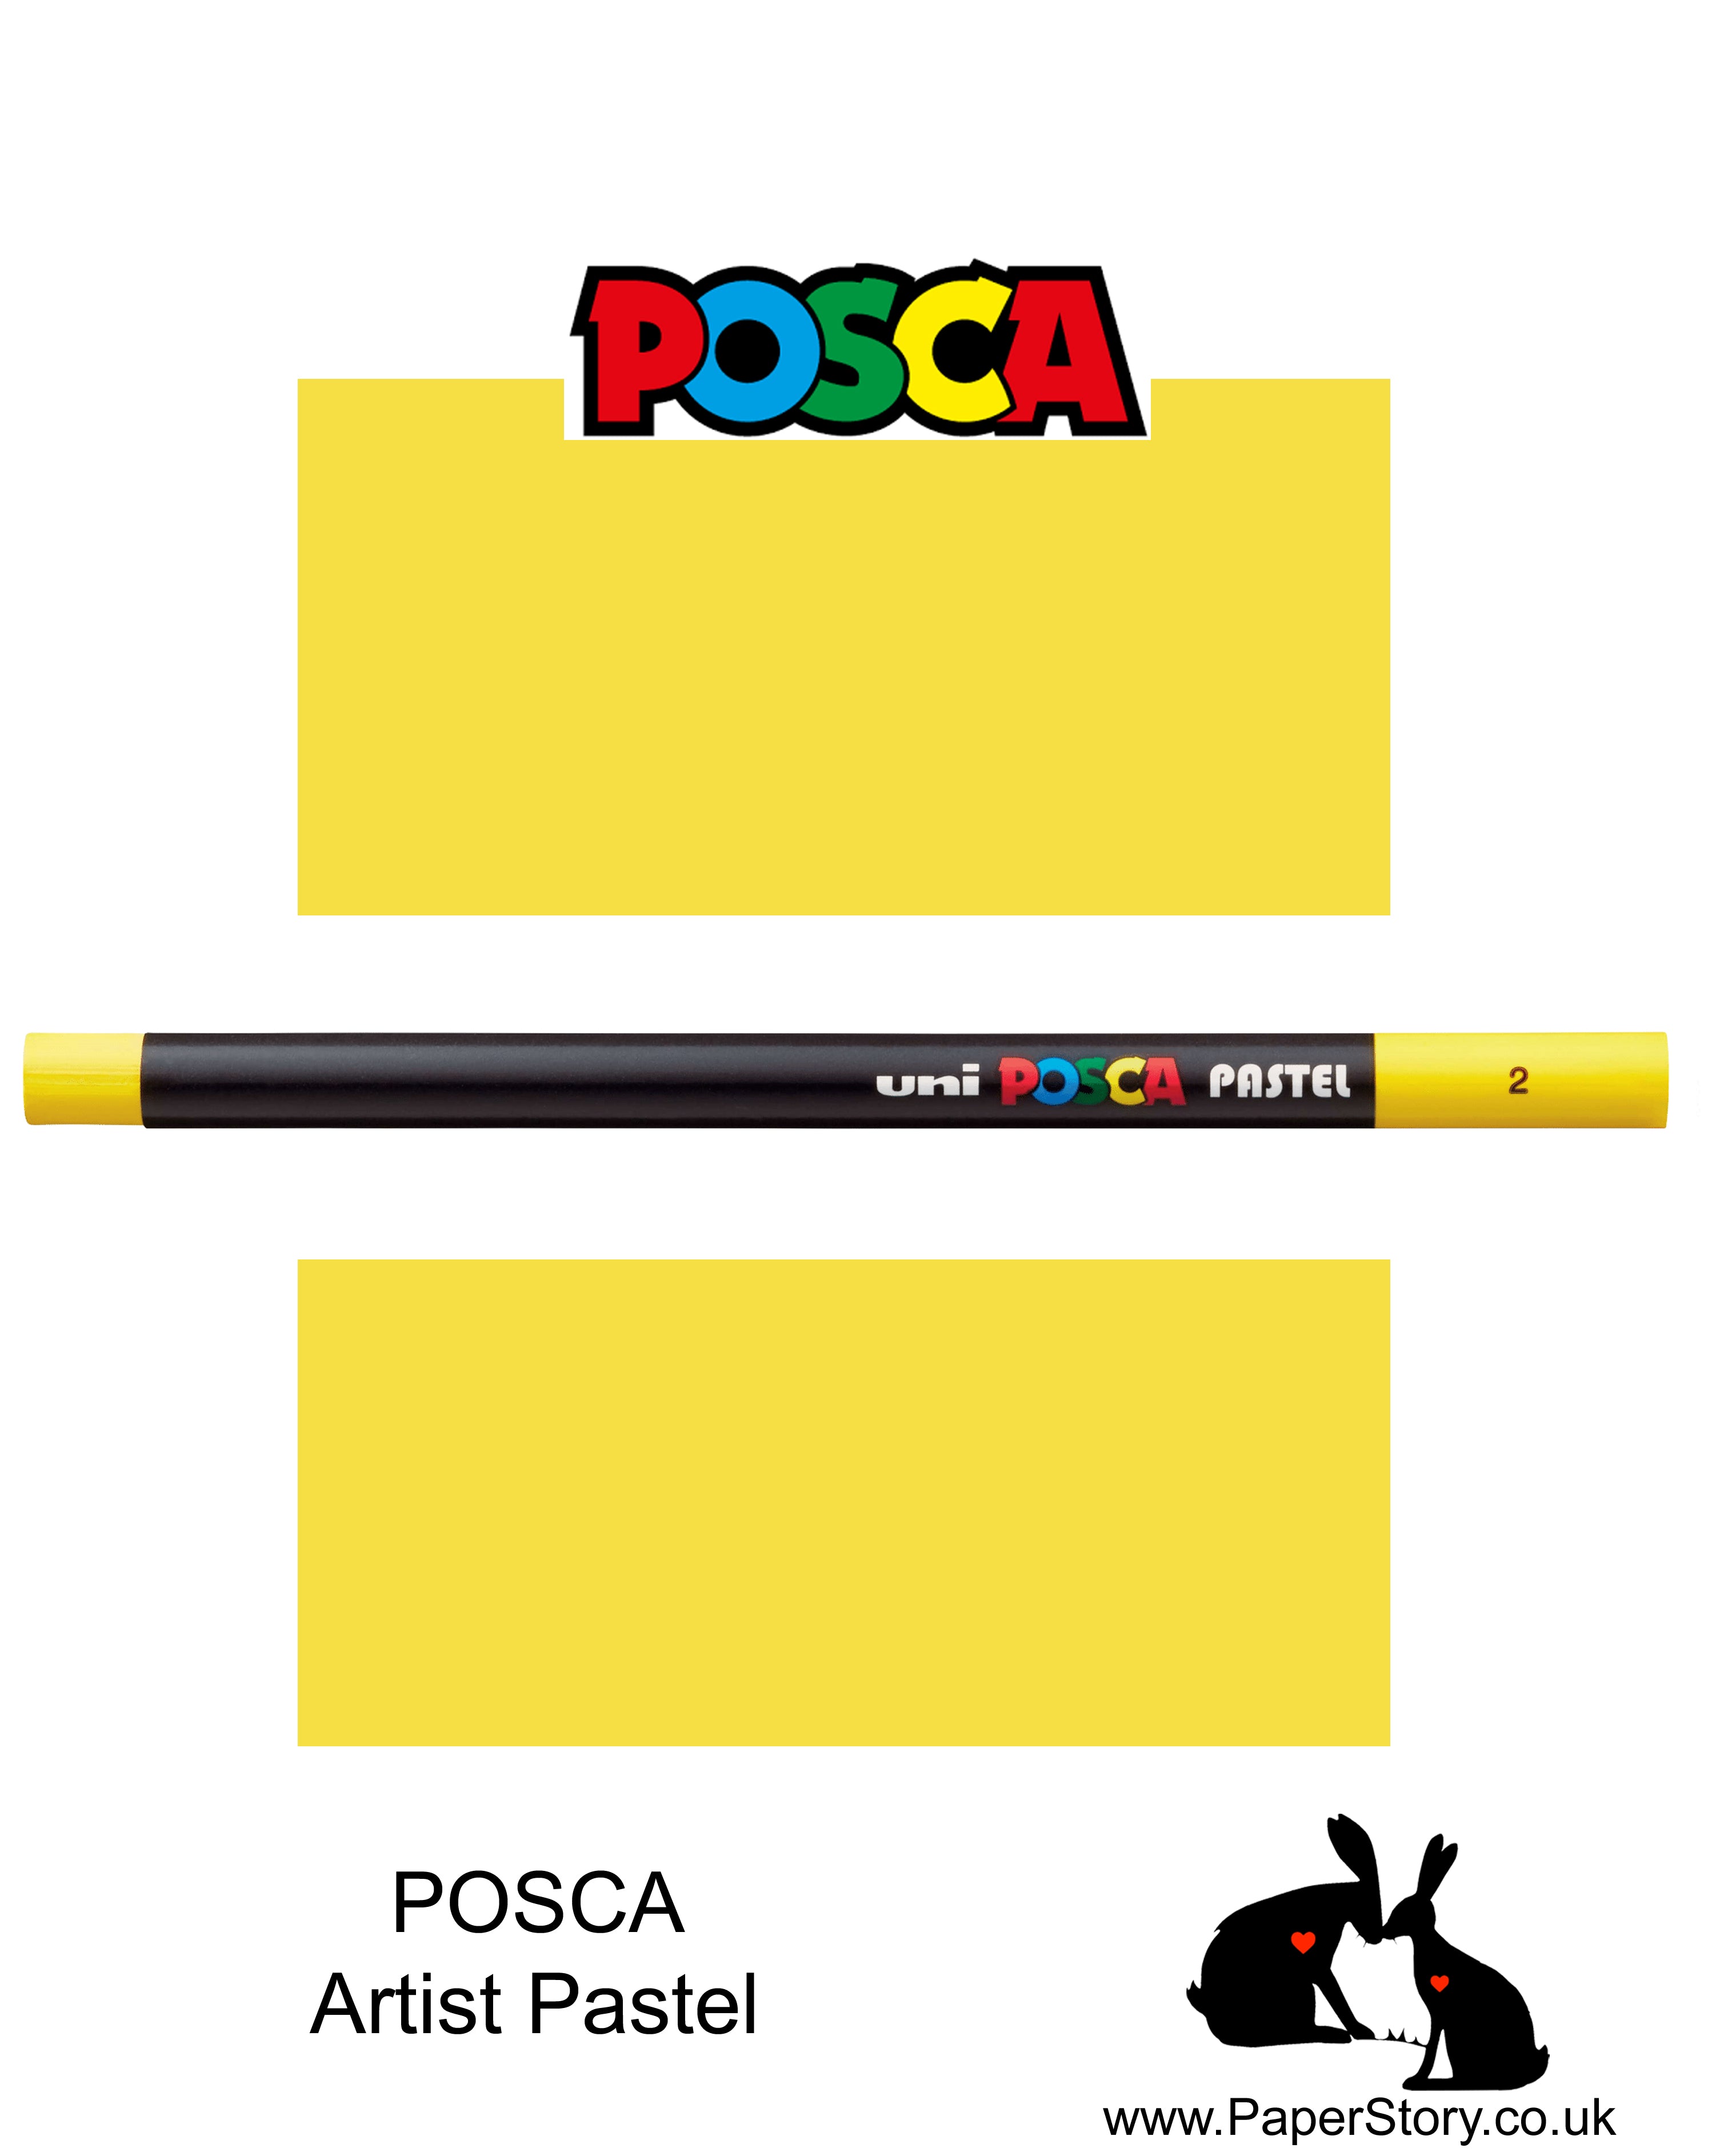 New Uni POSCA colour Pastels Bright Yellow, Colours can be blended and overlaid, you can stipple, colour block, cross-hatch, scratch and outline. You can heat the sticks to create textured effects.